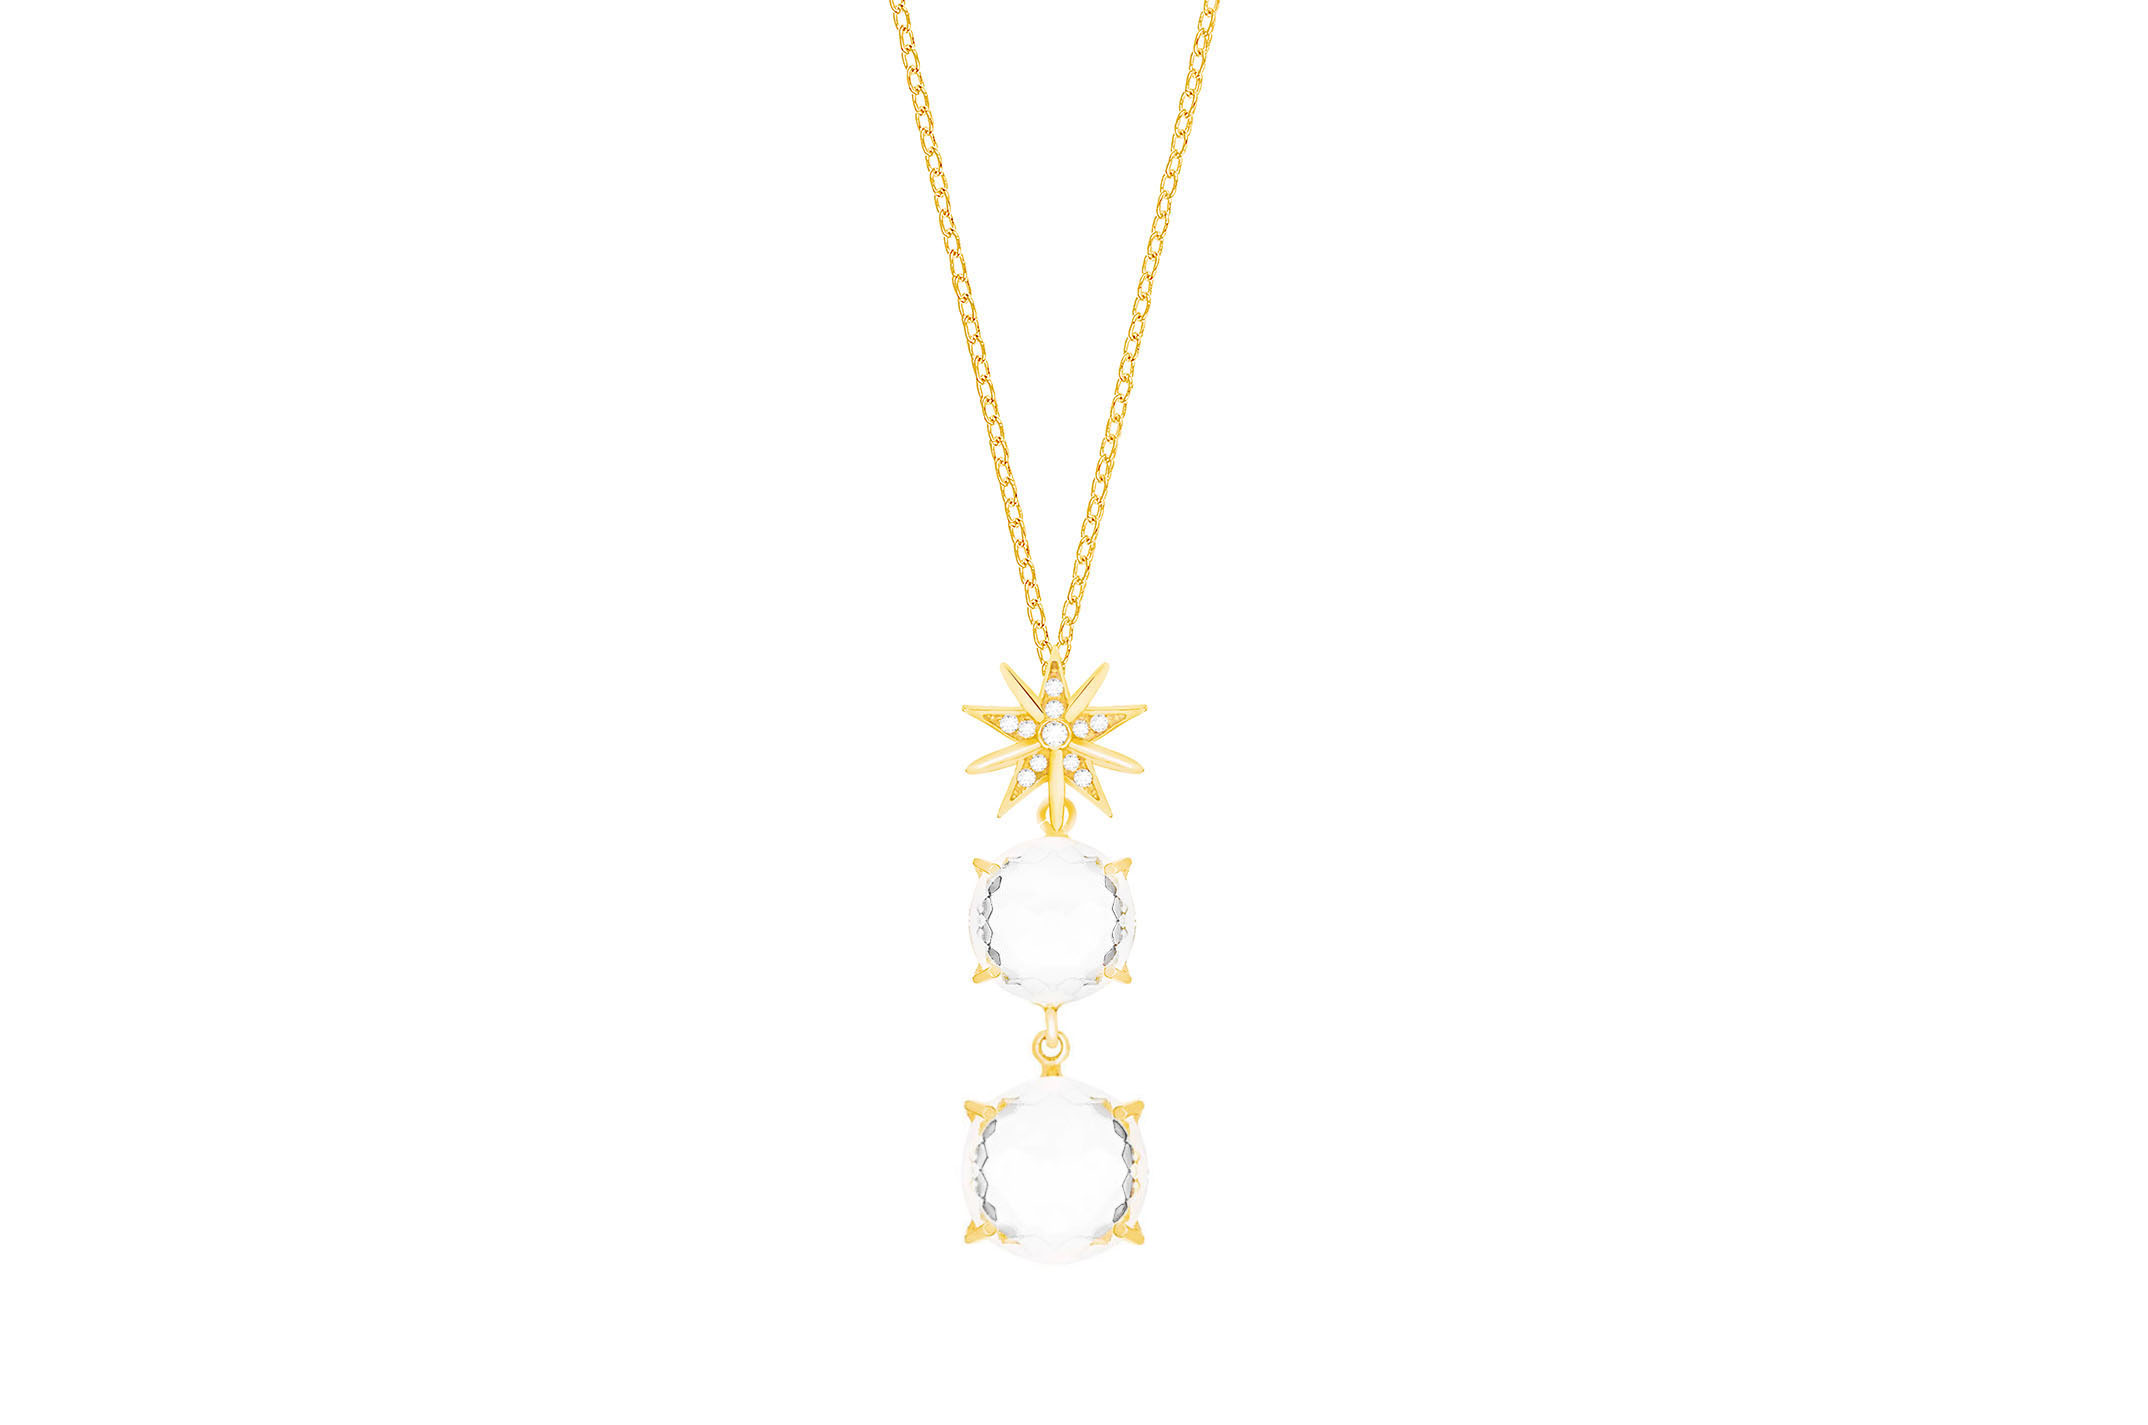 Jewel: necklace;Material: silver 925;Weight: 5.5 gr;Stone: crystal & zirconia;Color: yellow;Size: 38 cm + 15 cm;Pendent size: 3.8 cm